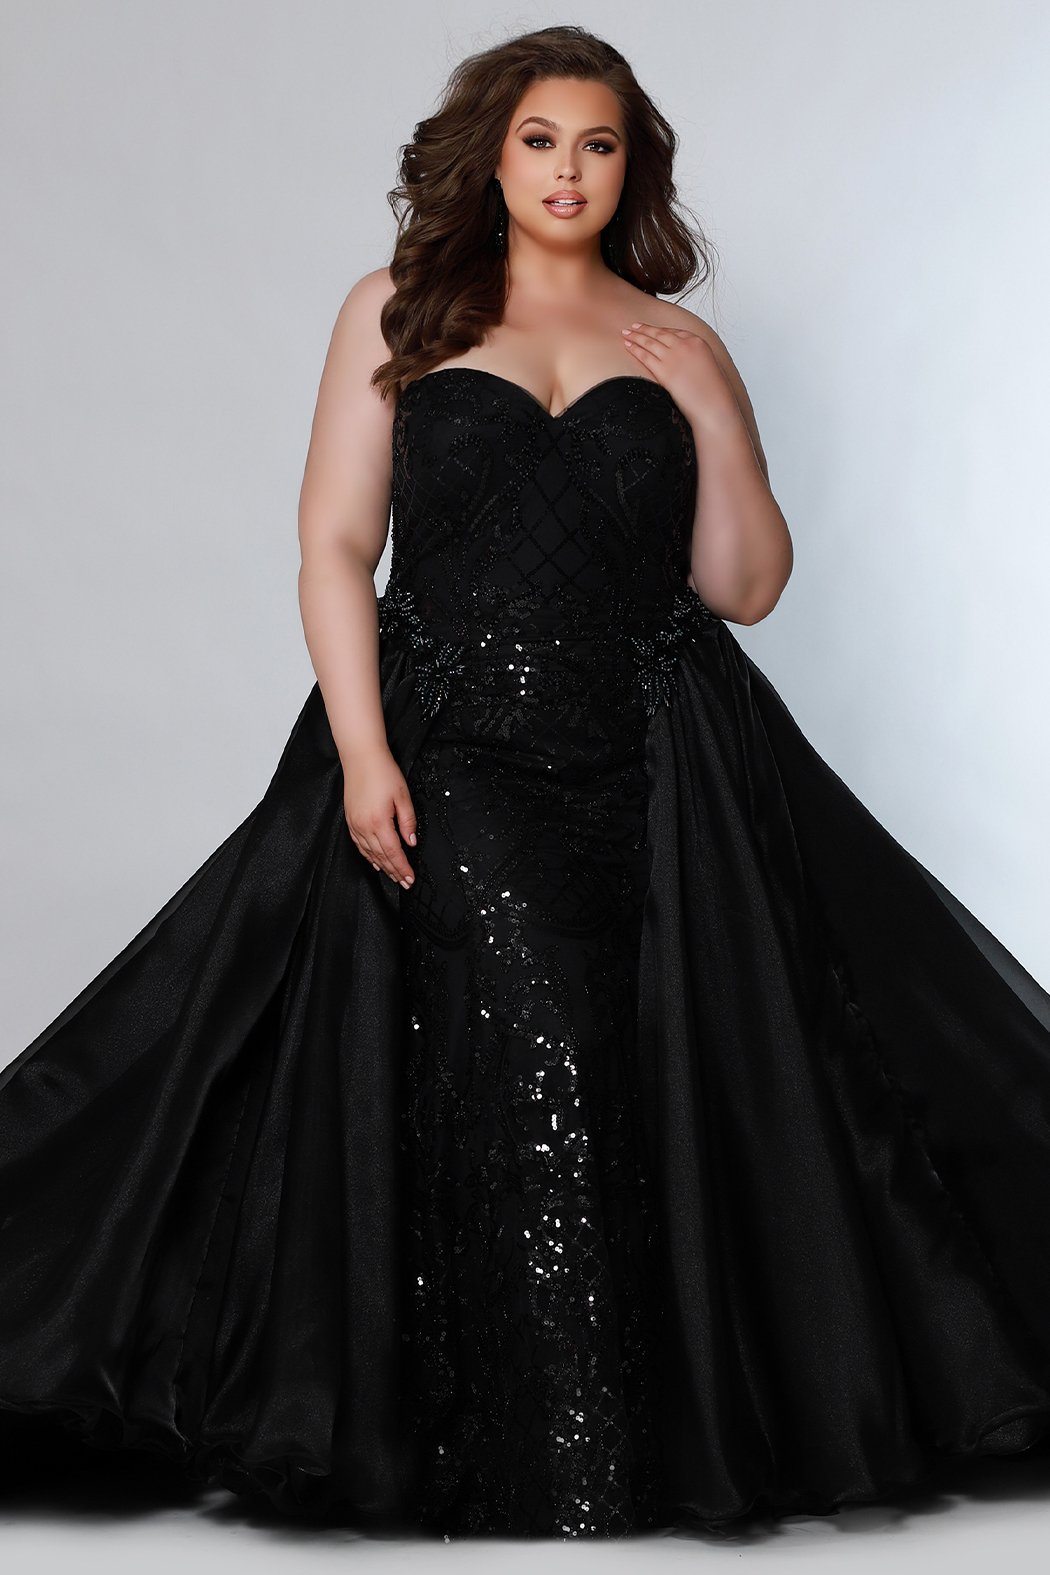 lintagirlyabey | Gowns dresses, Simple gowns, Gown party wear